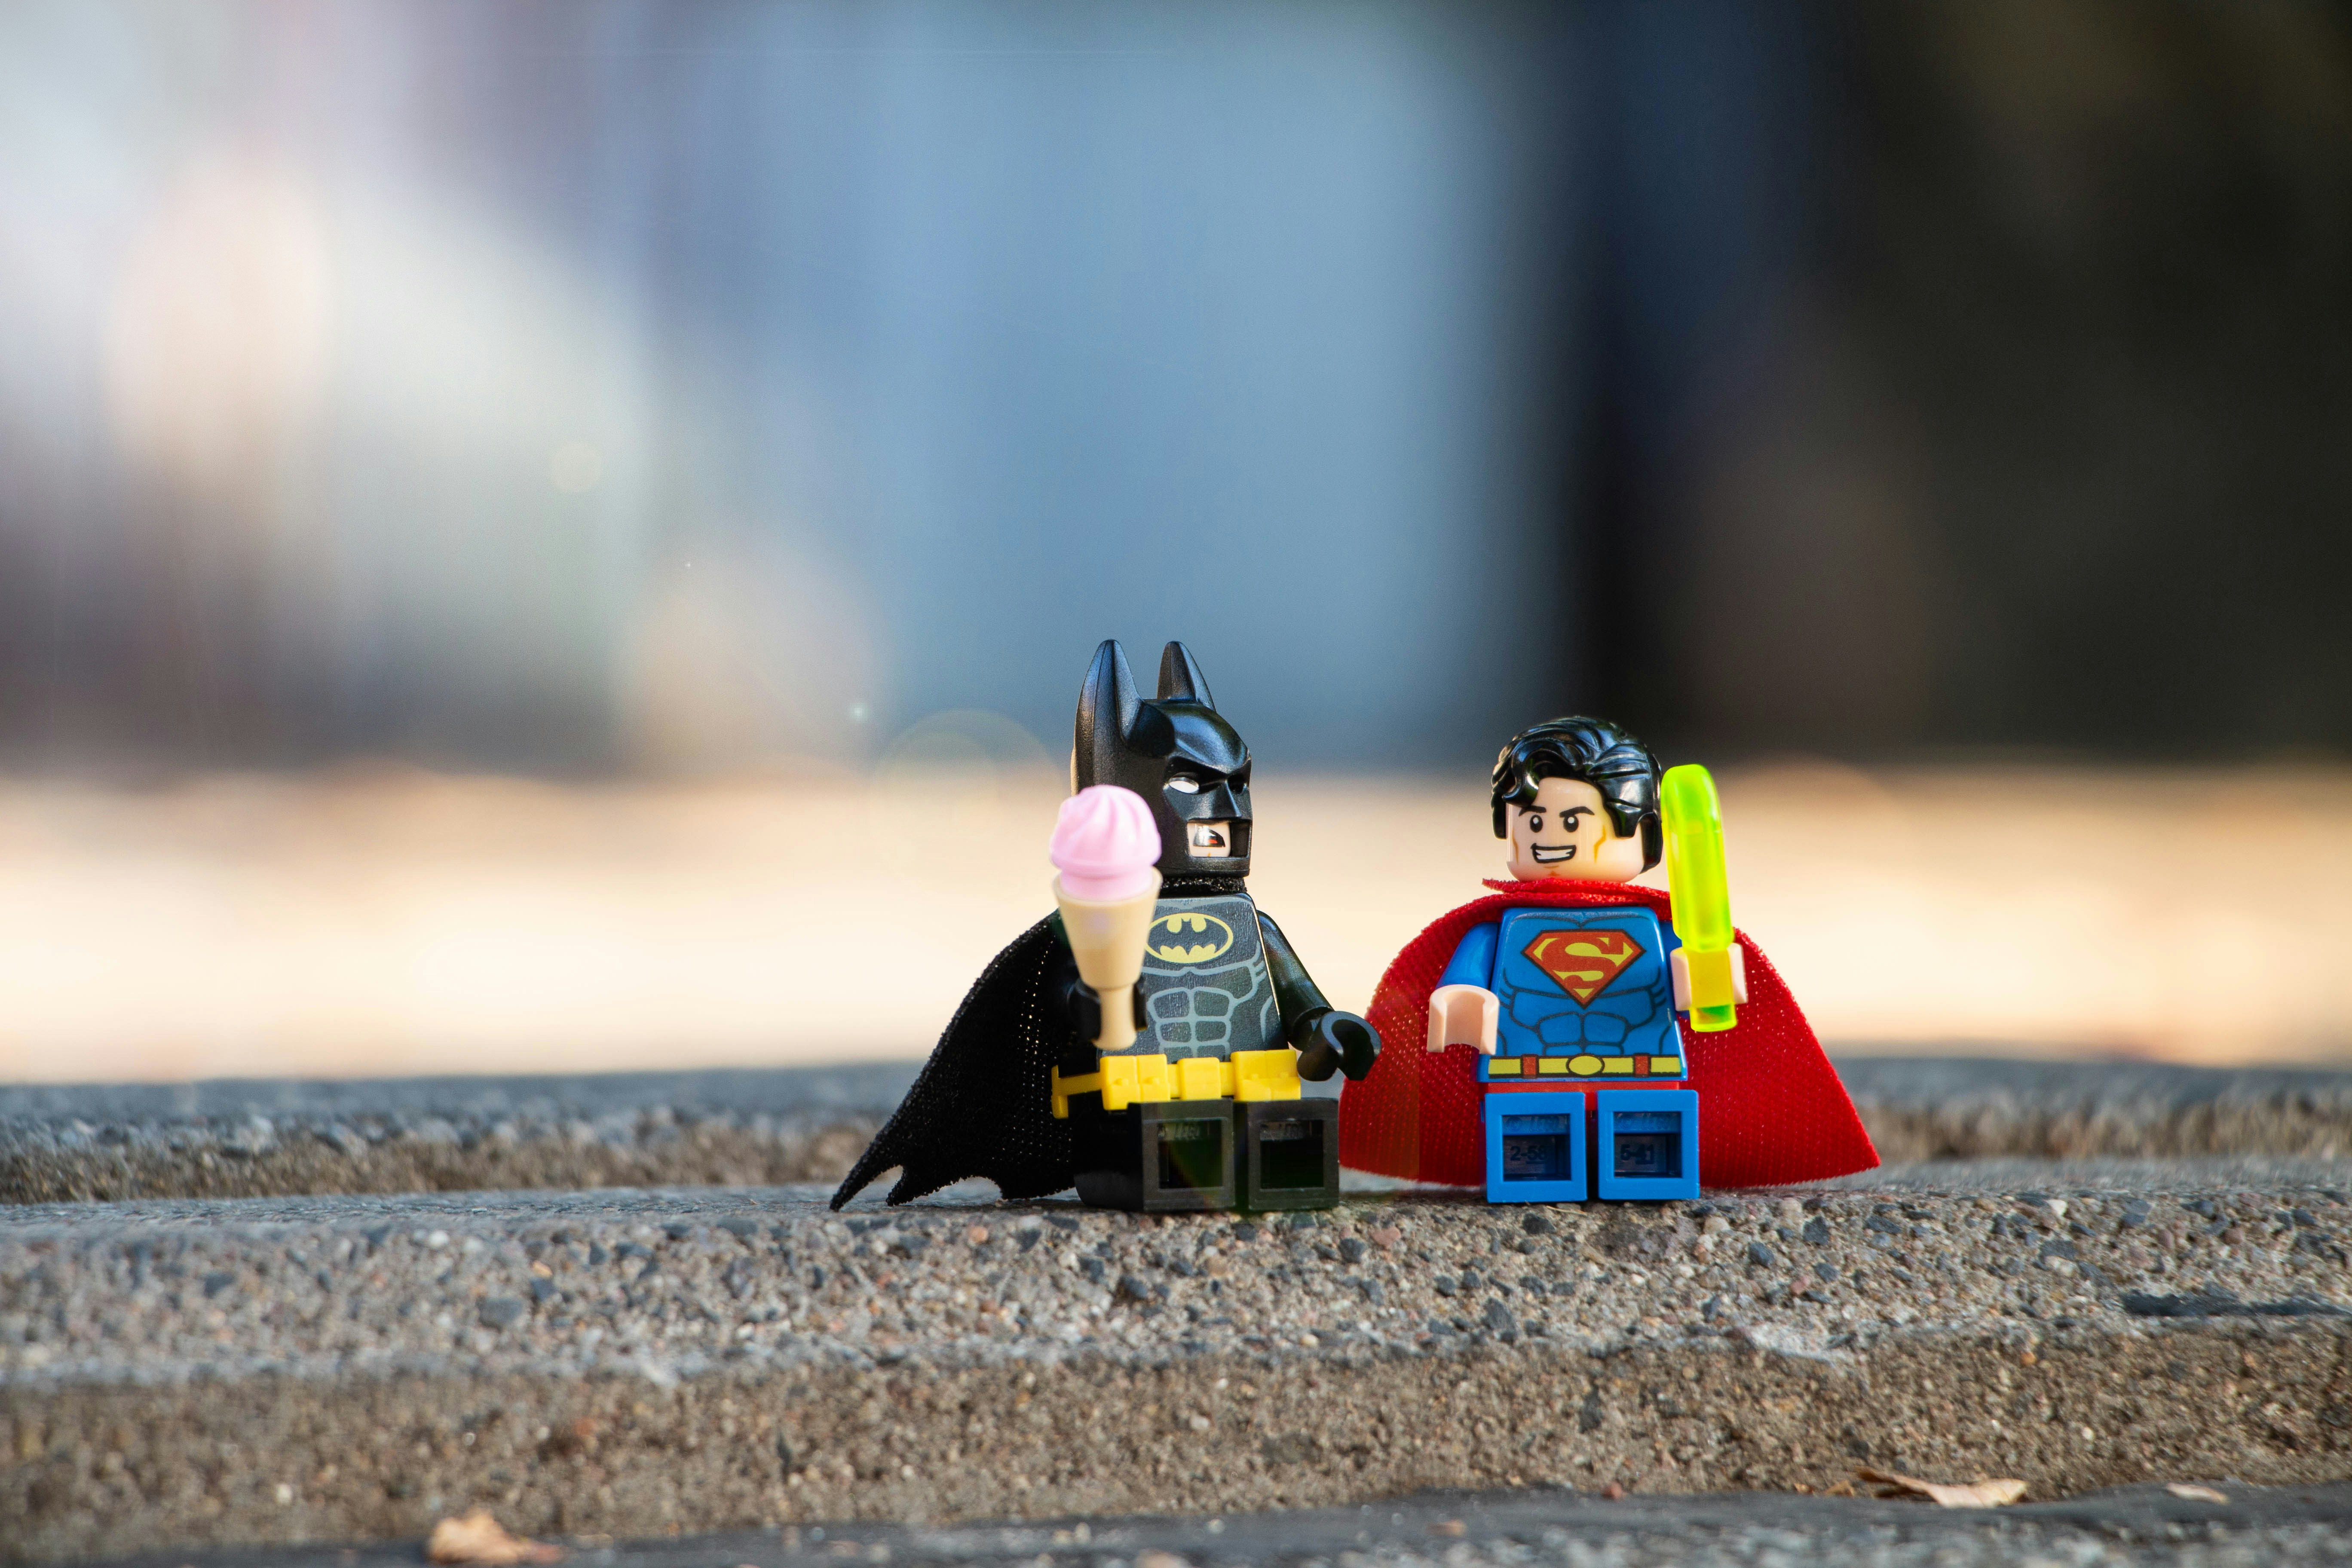 batman and superman lego characters eating ice cream together